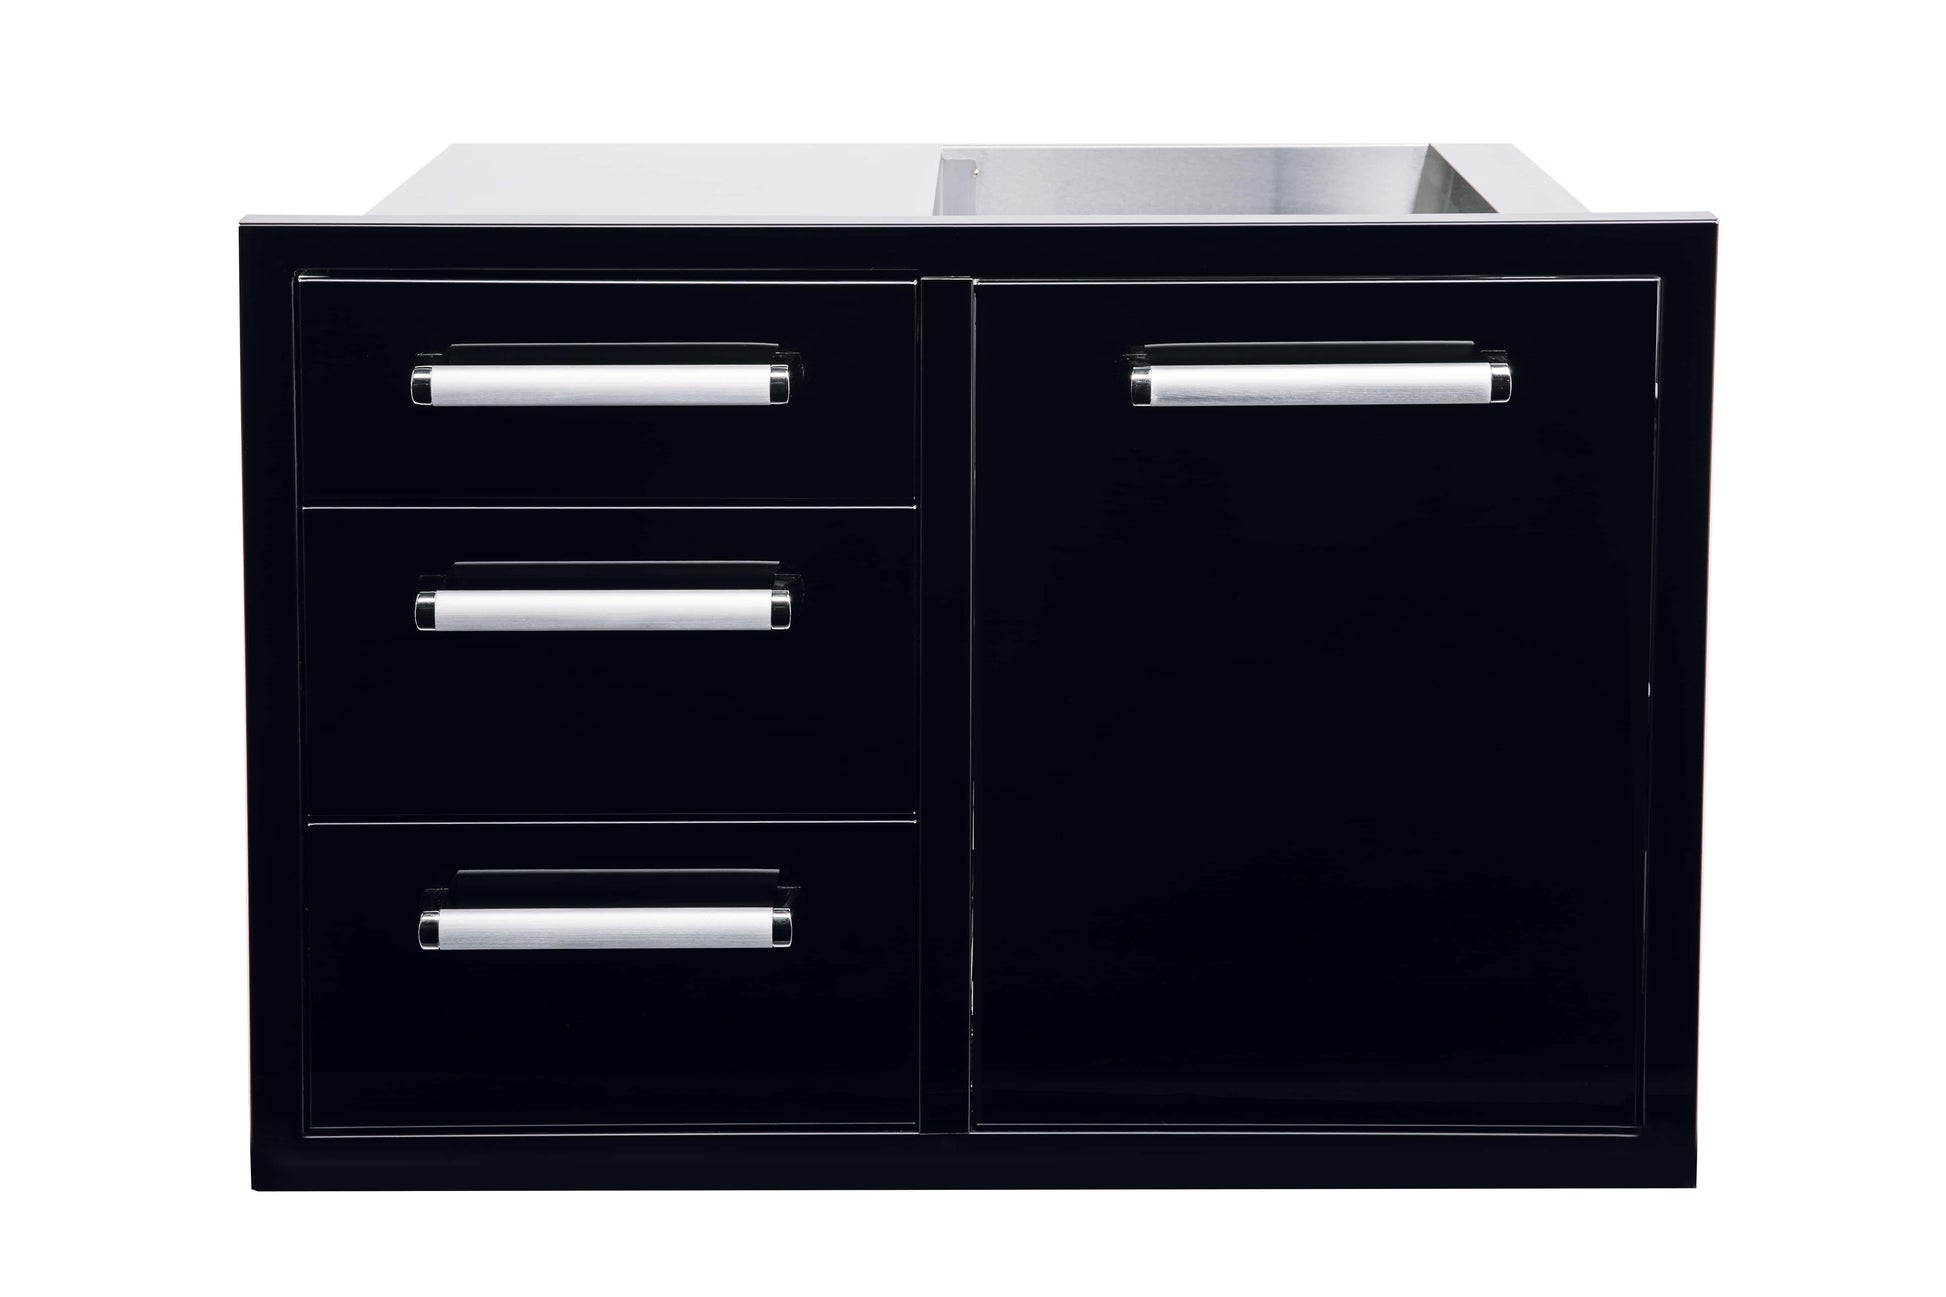 Bonfire-Black-stainless-steel-outdoor-kitchen-and-BBQ-island-Door-and-triple-Drawer-Combo-Black-Series-CBATDT-B